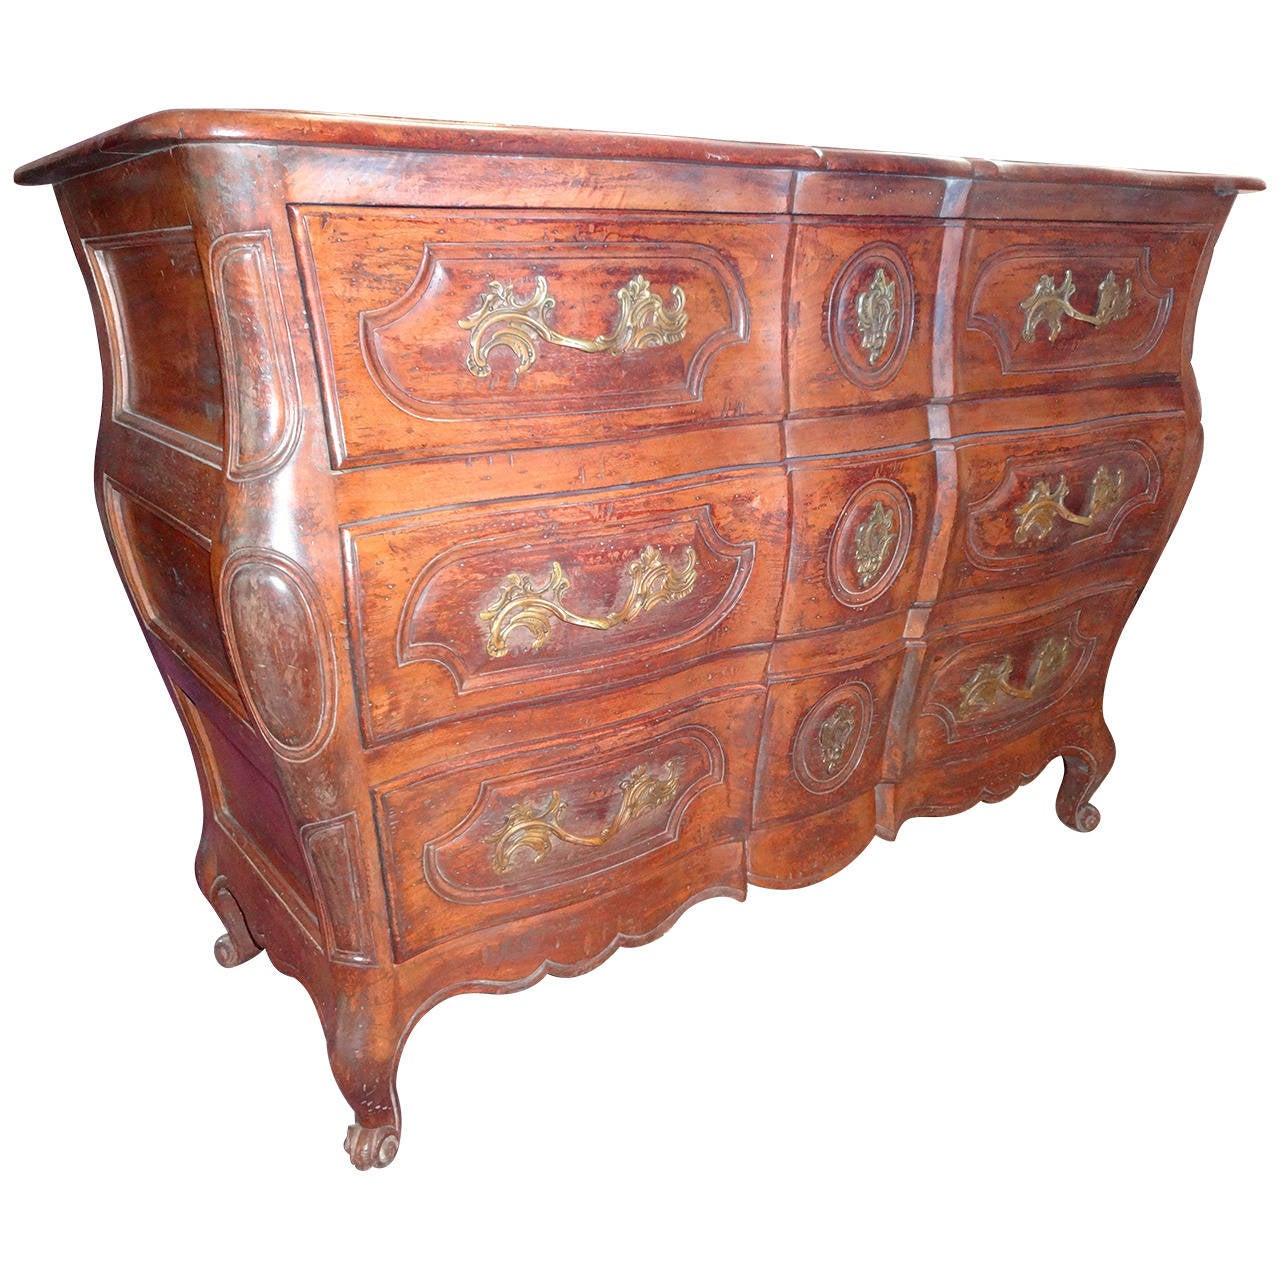 A French provincial walnut bombe commode with bronze pulls. The chest has three drawers.